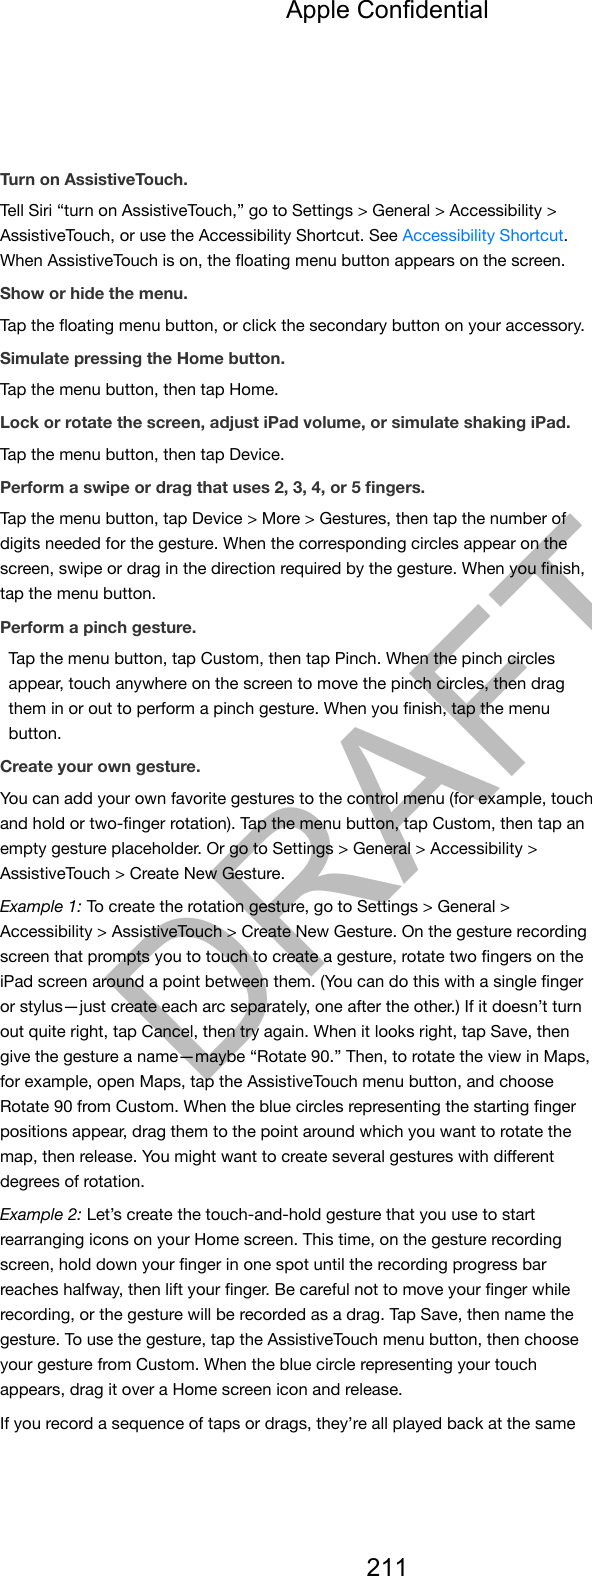 Turn on AssistiveTouch.Tell Siri “turn on AssistiveTouch,” go to Settings &gt; General &gt; Accessibility &gt;AssistiveTouch, or use the Accessibility Shortcut. See Accessibility Shortcut.When AssistiveTouch is on, the ﬂoating menu button appears on the screen.Show or hide the menu.Tap the ﬂoating menu button, or click the secondary button on your accessory.Simulate pressing the Home button.Tap the menu button, then tap Home.Lock or rotate the screen, adjust iPad volume, or simulate shaking iPad.Tap the menu button, then tap Device.Perform a swipe or drag that uses 2, 3, 4, or 5 ﬁngers.Tap the menu button, tap Device &gt; More &gt; Gestures, then tap the number ofdigits needed for the gesture. When the corresponding circles appear on thescreen, swipe or drag in the direction required by the gesture. When you ﬁnish,tap the menu button.Perform a pinch gesture.Tap the menu button, tap Custom, then tap Pinch. When the pinch circlesappear, touch anywhere on the screen to move the pinch circles, then dragthem in or out to perform a pinch gesture. When you ﬁnish, tap the menubutton.Create your own gesture.You can add your own favorite gestures to the control menu (for example, touchand hold or two-ﬁnger rotation). Tap the menu button, tap Custom, then tap anempty gesture placeholder. Or go to Settings &gt; General &gt; Accessibility &gt;AssistiveTouch &gt; Create New Gesture.Example 1: To create the rotation gesture, go to Settings &gt; General &gt;Accessibility &gt; AssistiveTouch &gt; Create New Gesture. On the gesture recordingscreen that prompts you to touch to create a gesture, rotate two ﬁngers on theiPad screen around a point between them. (You can do this with a single ﬁngeror stylus—just create each arc separately, one after the other.) If it doesn’t turnout quite right, tap Cancel, then try again. When it looks right, tap Save, thengive the gesture a name—maybe “Rotate 90.” Then, to rotate the view in Maps,for example, open Maps, tap the AssistiveTouch menu button, and chooseRotate 90 from Custom. When the blue circles representing the starting ﬁngerpositions appear, drag them to the point around which you want to rotate themap, then release. You might want to create several gestures with diﬀerentdegrees of rotation.Example 2: Let’s create the touch-and-hold gesture that you use to startrearranging icons on your Home screen. This time, on the gesture recordingscreen, hold down your ﬁnger in one spot until the recording progress barreaches halfway, then lift your ﬁnger. Be careful not to move your ﬁnger whilerecording, or the gesture will be recorded as a drag. Tap Save, then name thegesture. To use the gesture, tap the AssistiveTouch menu button, then chooseyour gesture from Custom. When the blue circle representing your touchappears, drag it over a Home screen icon and release.If you record a sequence of taps or drags, they’re all played back at the sameApple Confidential211DRAFT